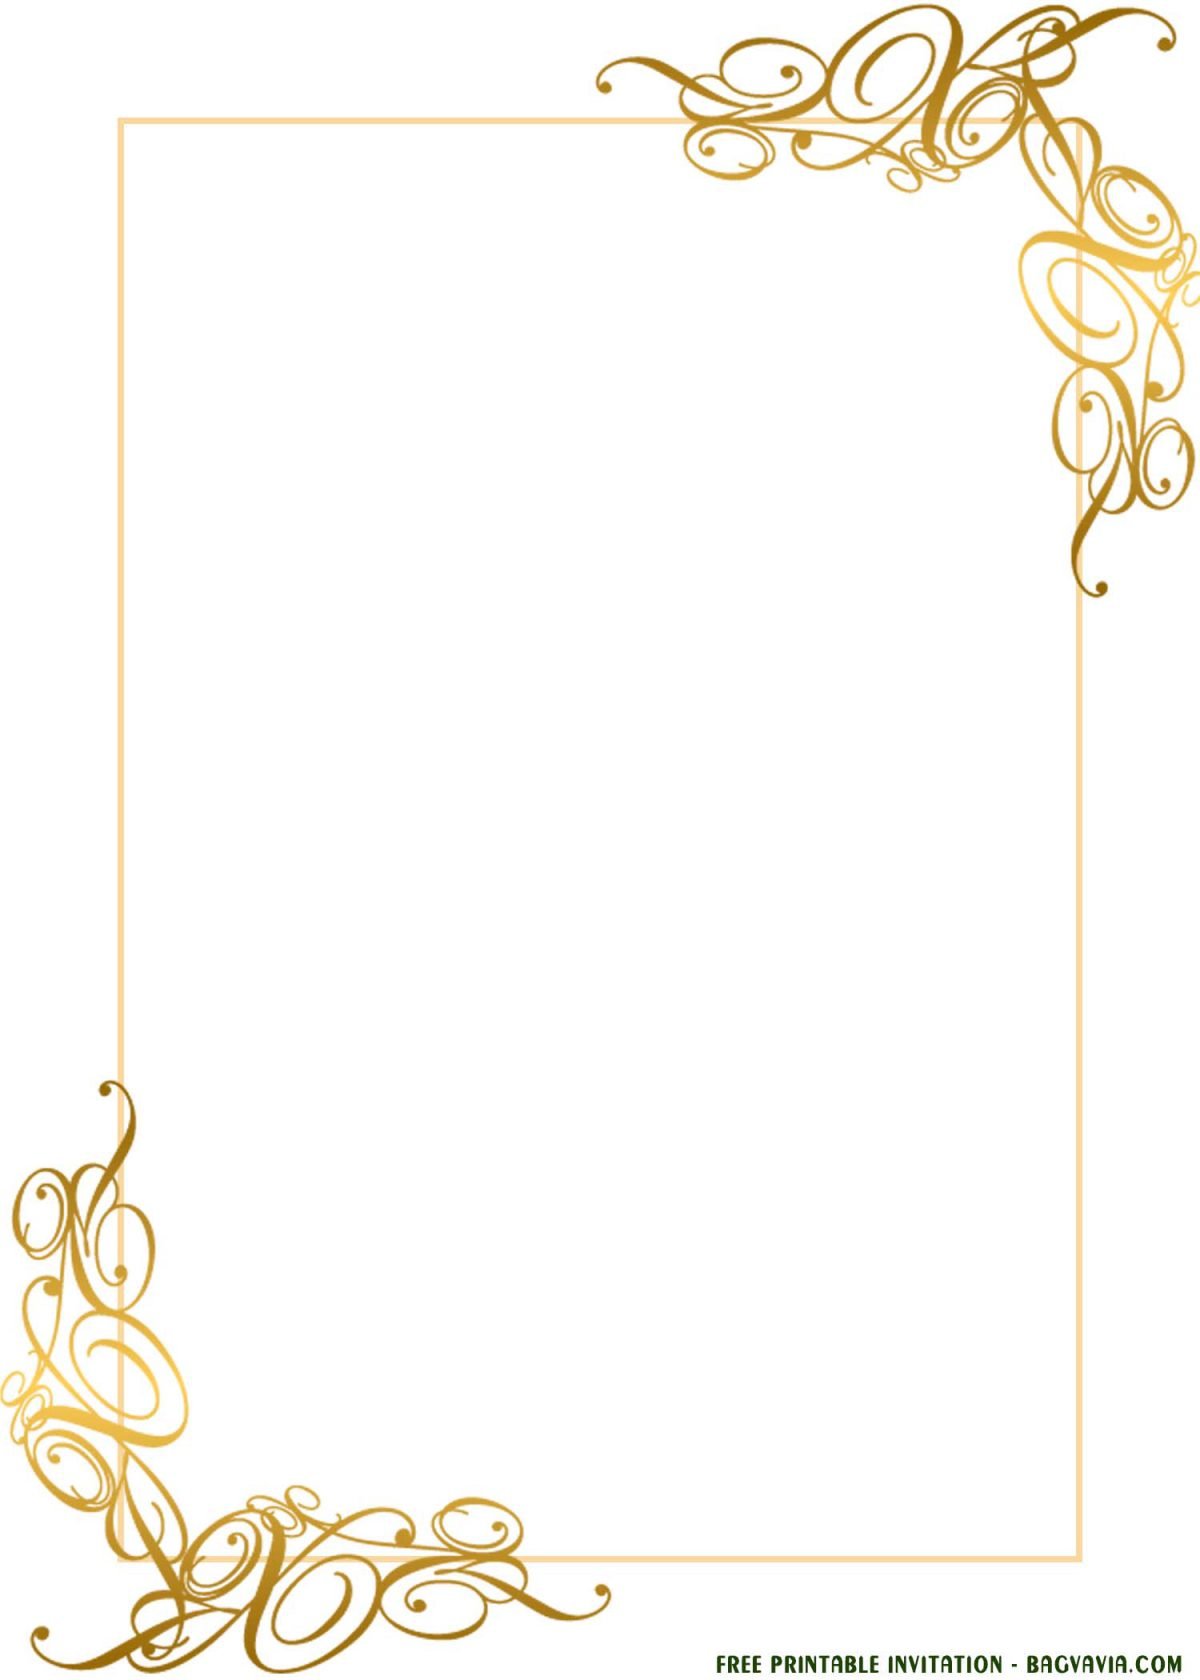 (free Printable) – Gold Lace Invitation Templates For Any Occasions 